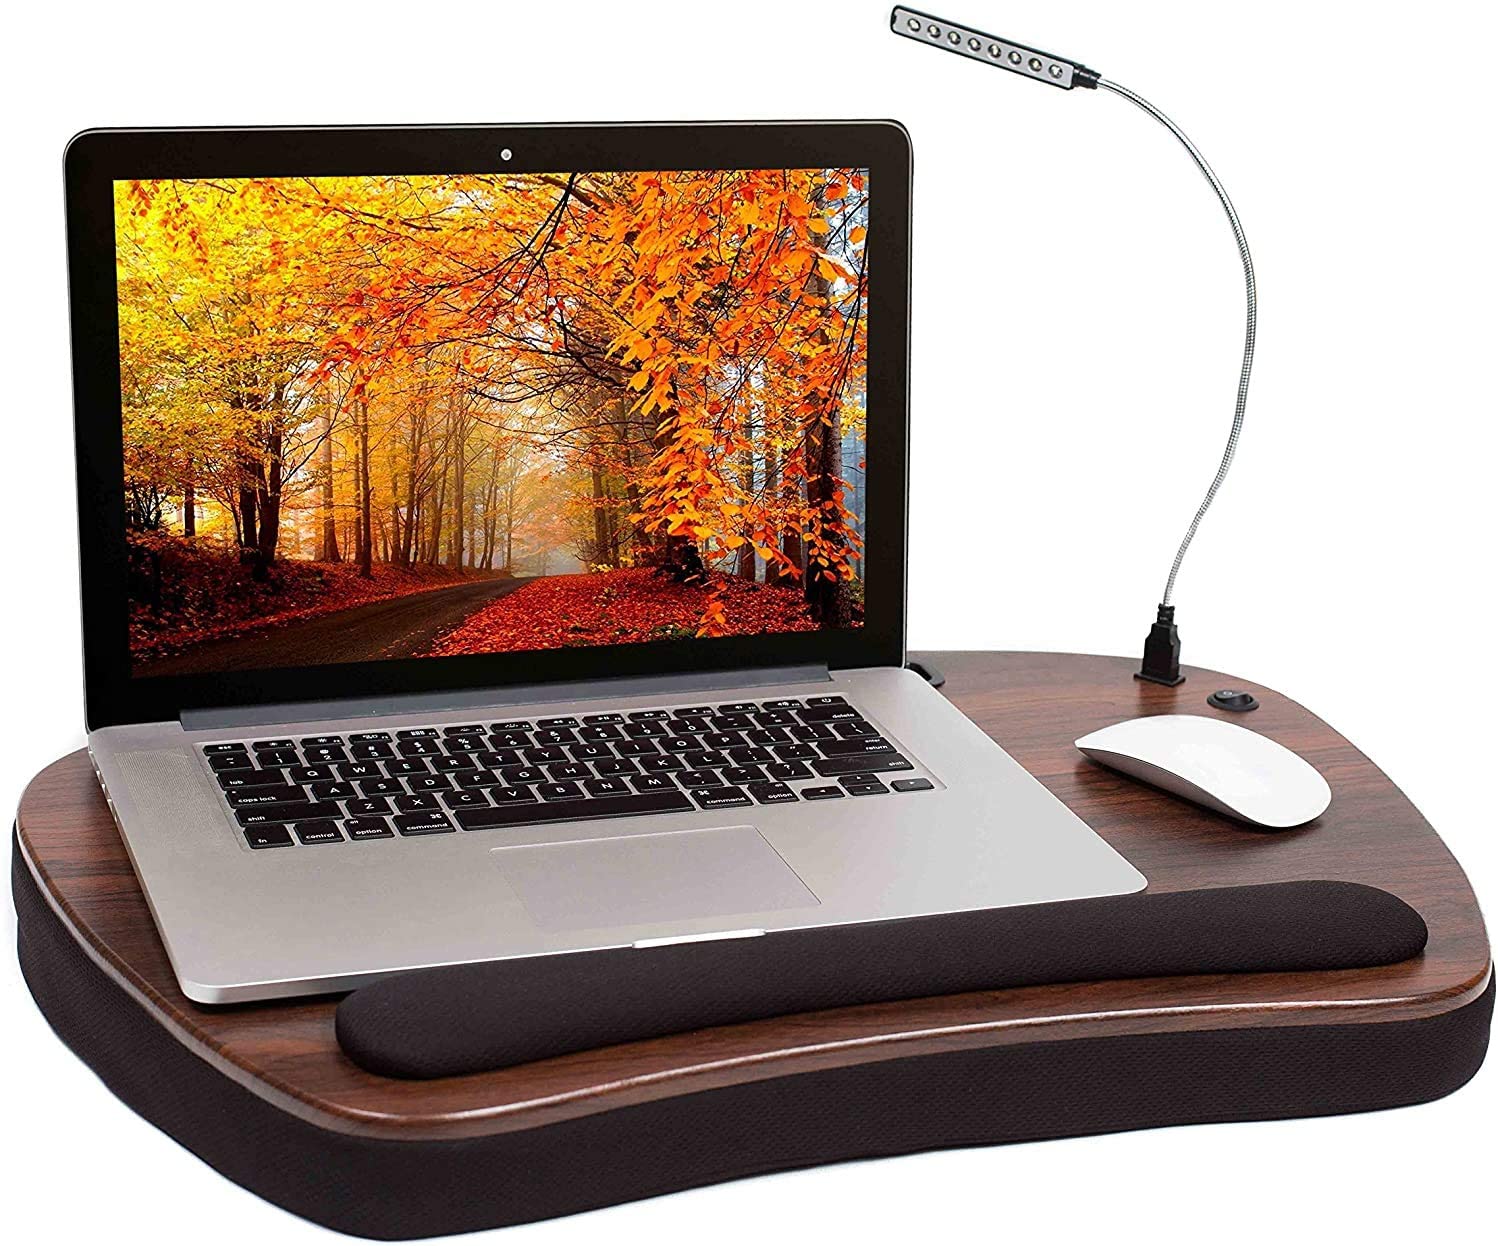 Sofia + Sam Portable Bed Laptop Stand